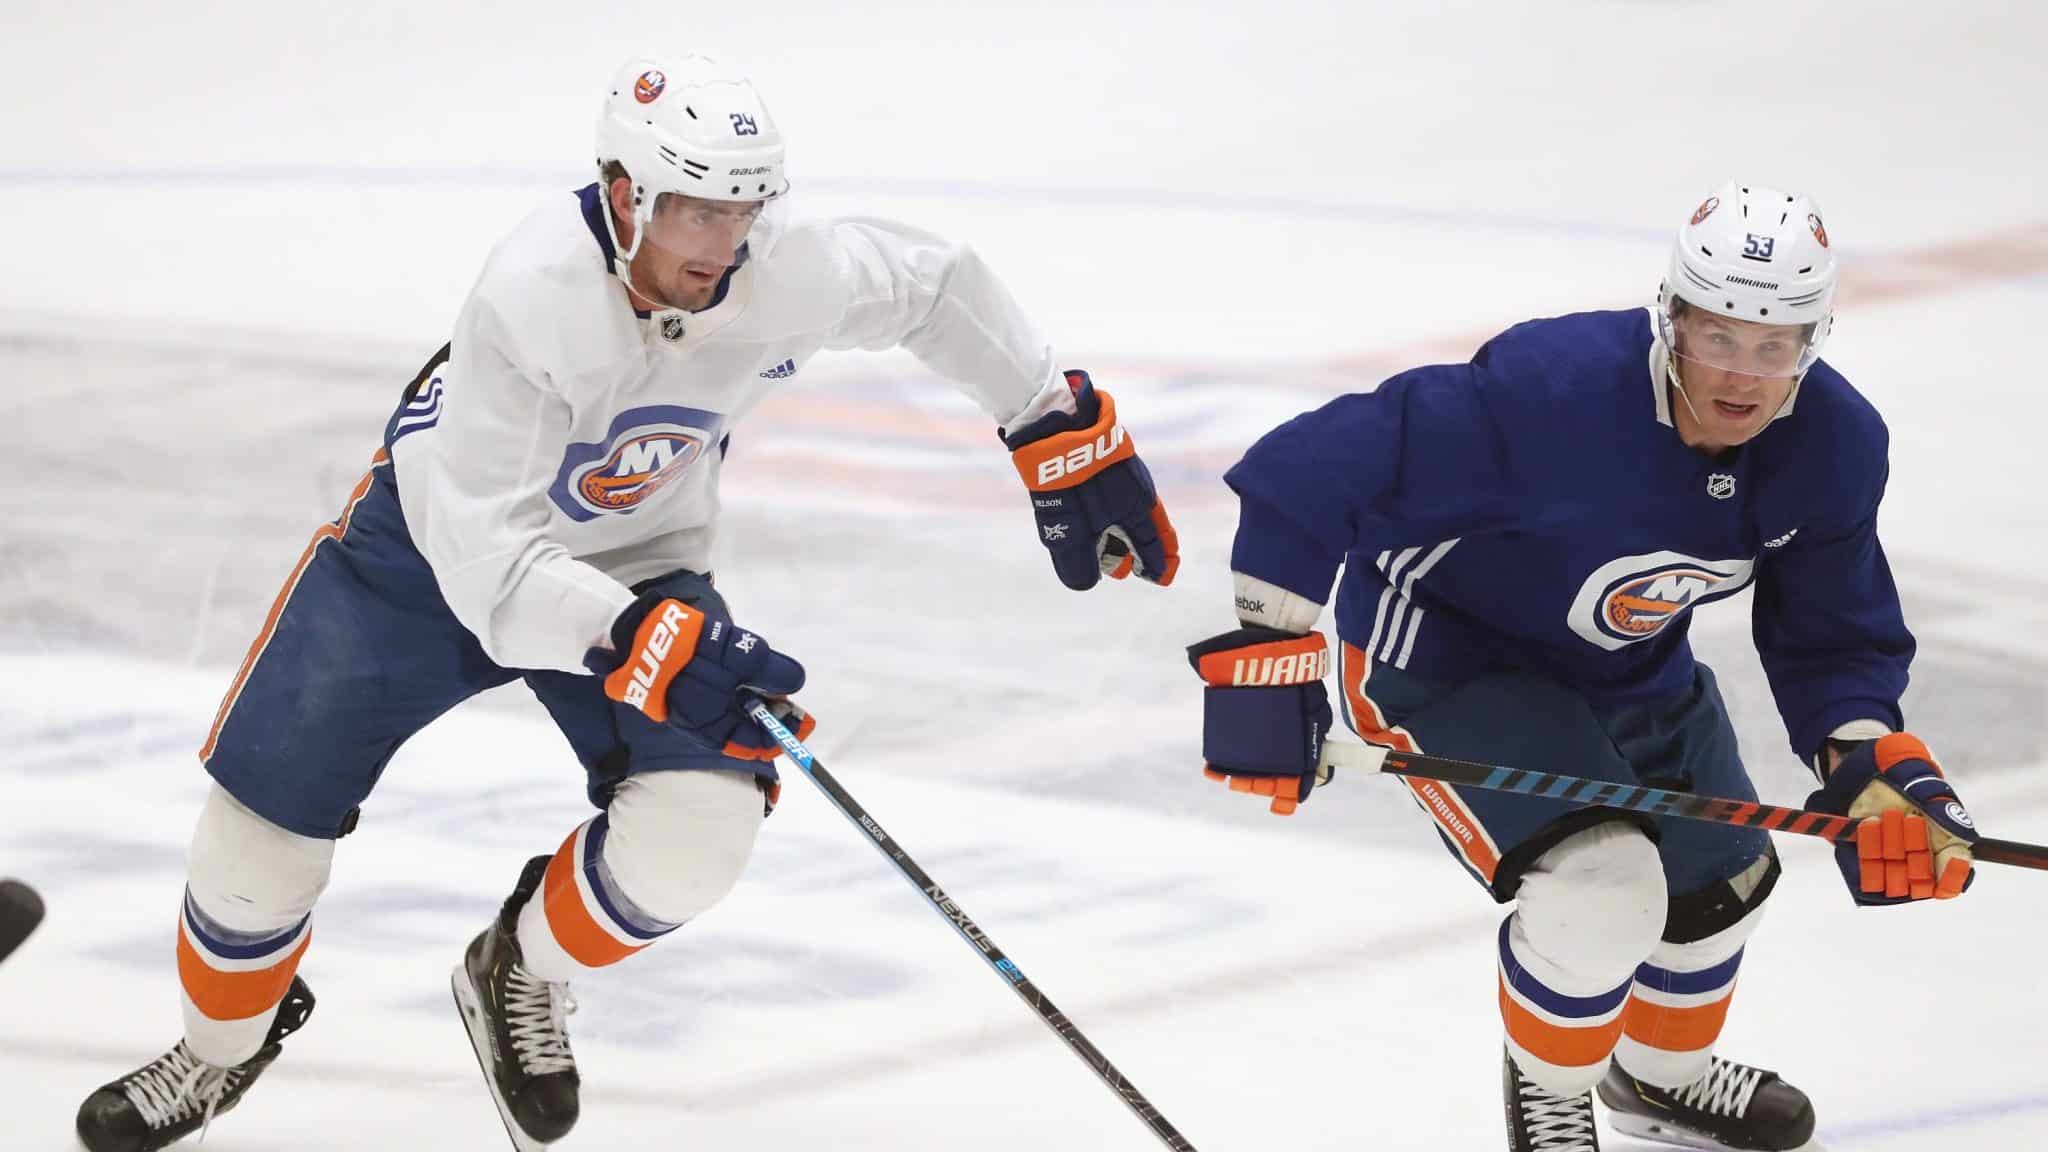 EAST MEADOW, NEW YORK - JULY 13: (L-R) Brock Nelson #29 and Casey Cizikas #53 of the New York Islanders skate in practice at the Northwell Health Ice Center on July 13, 2020 in East Meadow, New York. This is the first practice for the team since the NHL paused it's season due to the coronavirus pandemic.